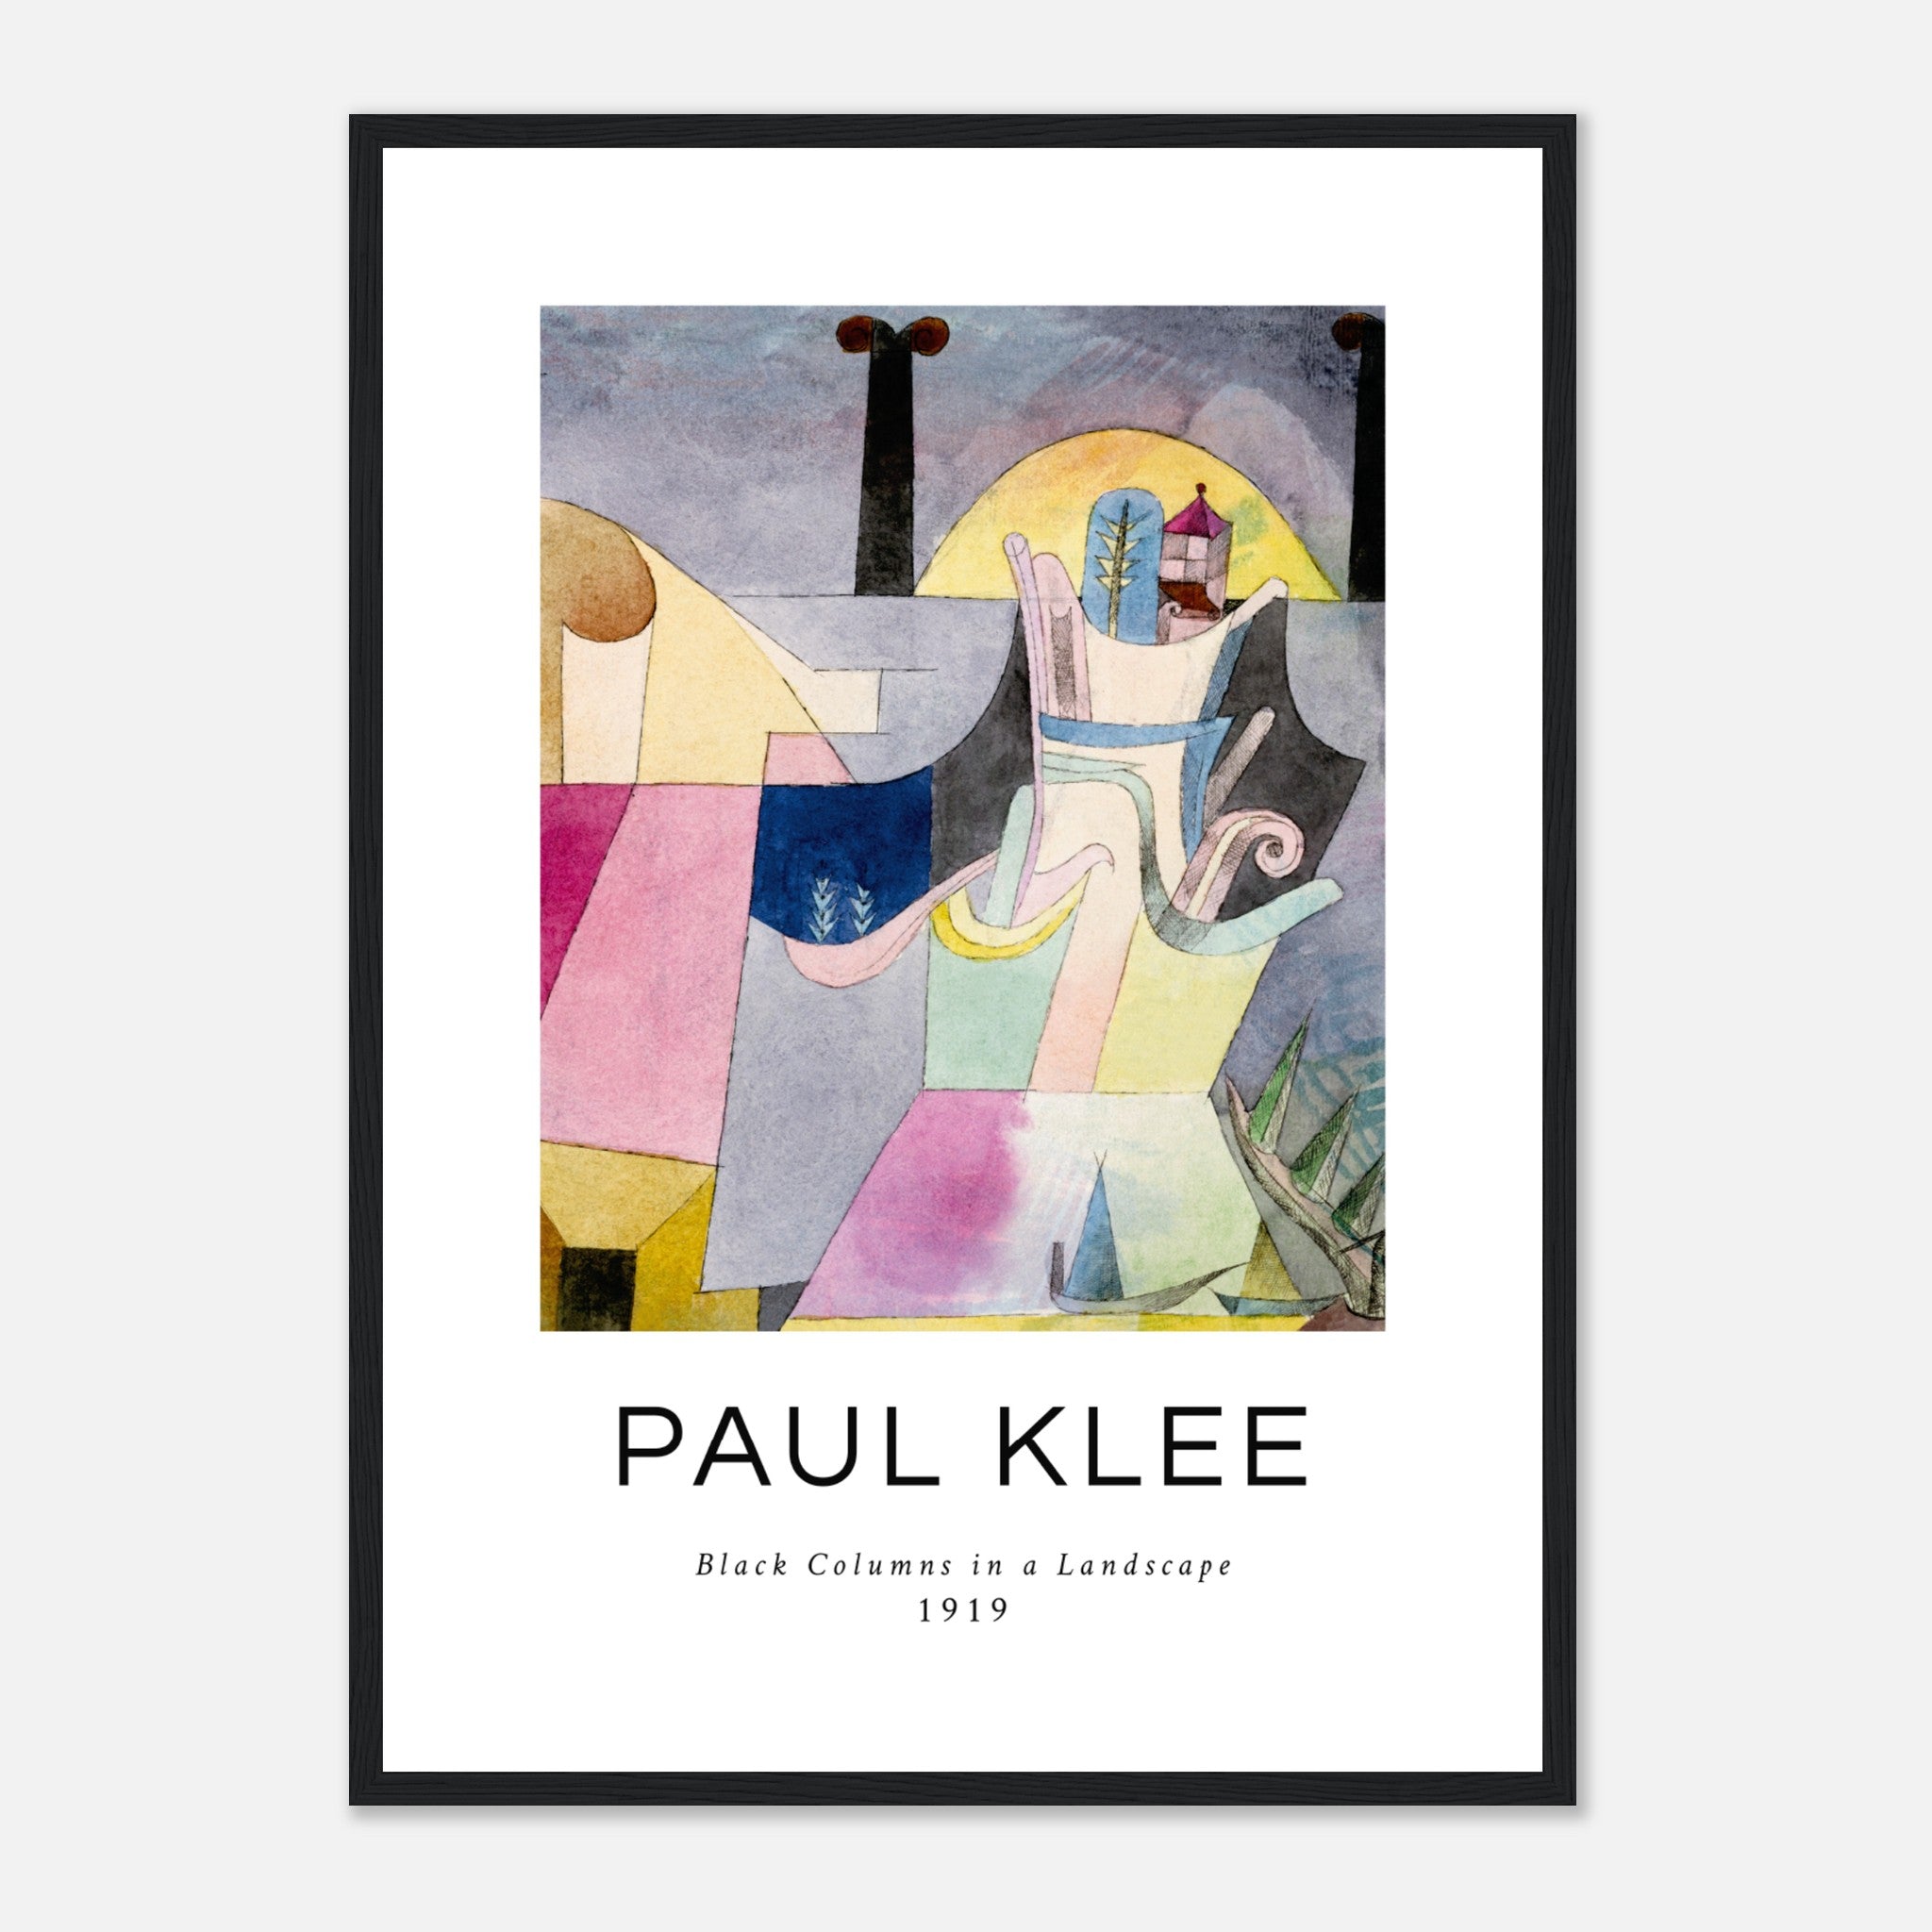 Black Columns in a Landscape by Paul Klee Poster